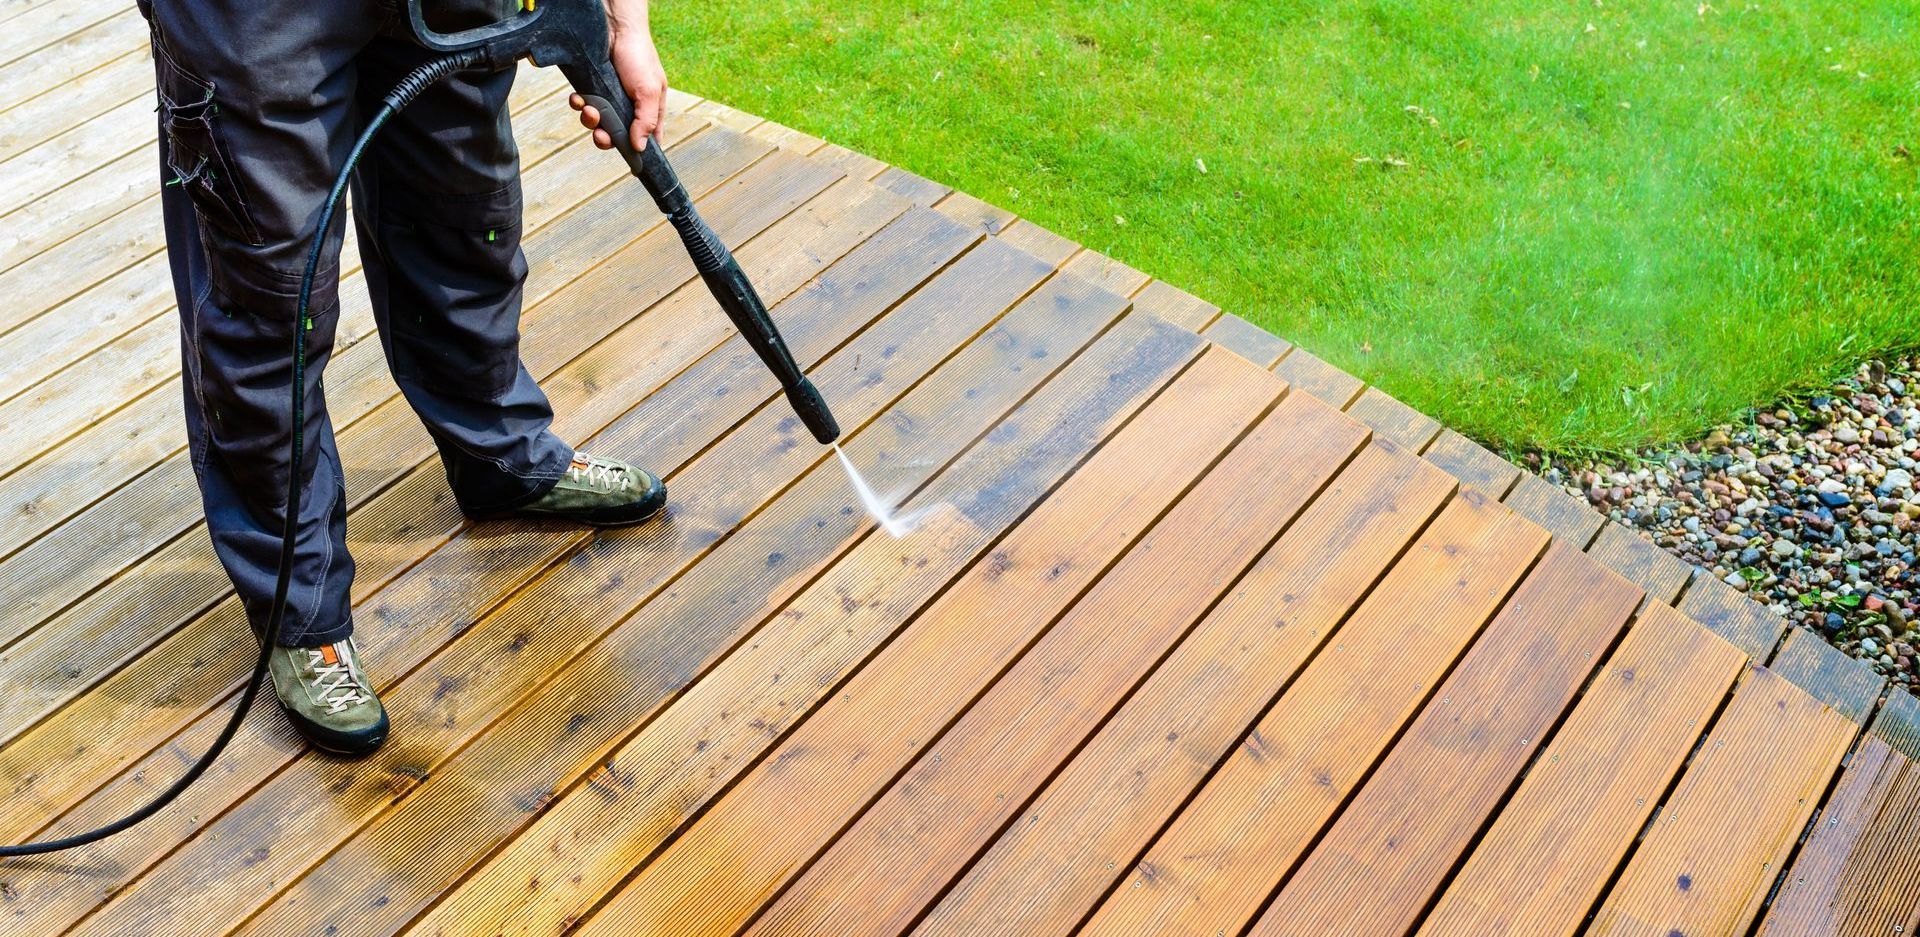 Best Residential Power Washing Company- Power Washer Fredrick County, MD